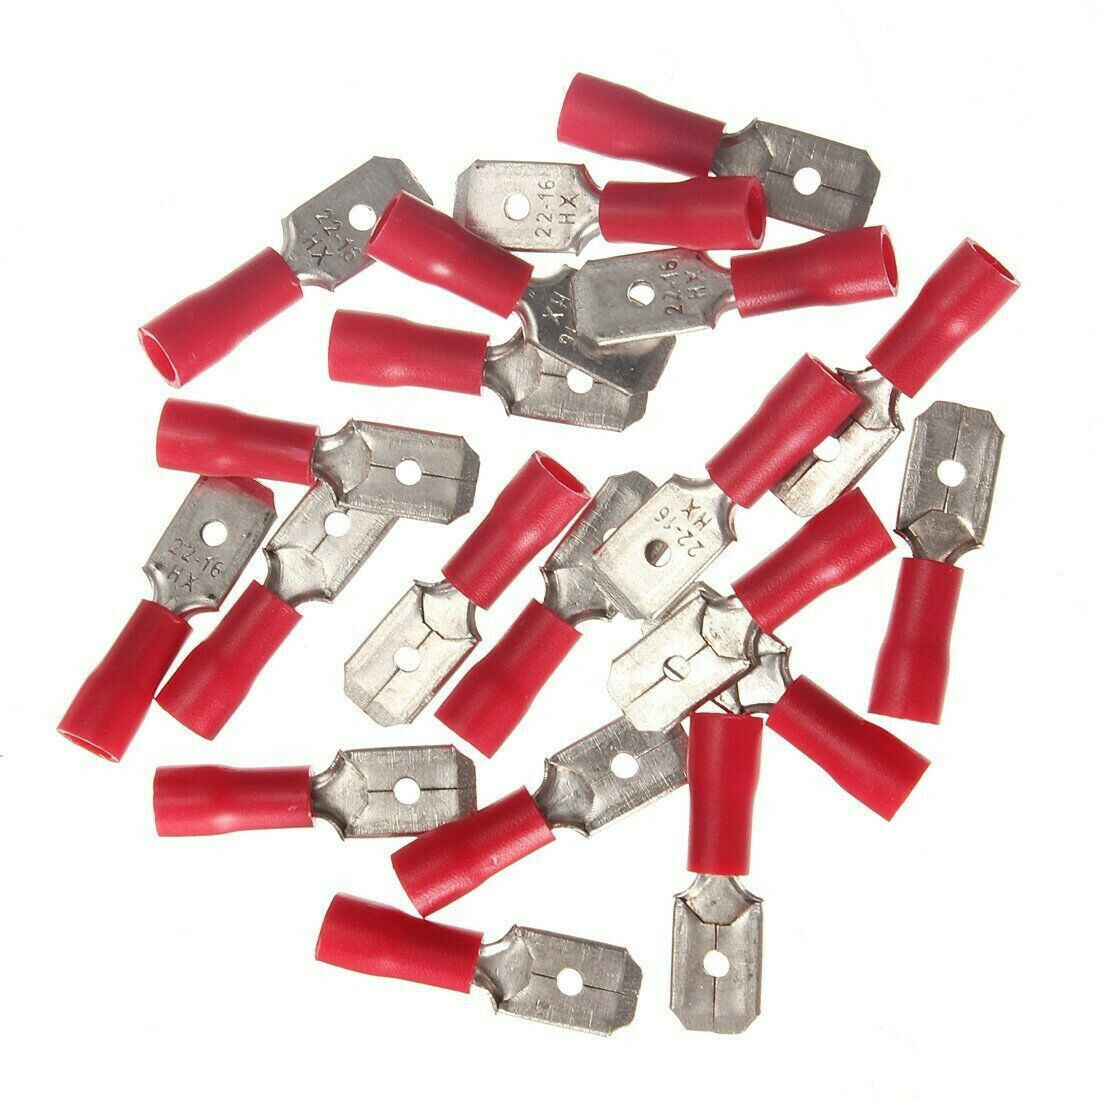 Red Male Insulated Spade Wire Connector Crimp Terminal MDD1.25-250 100x AWG22-16